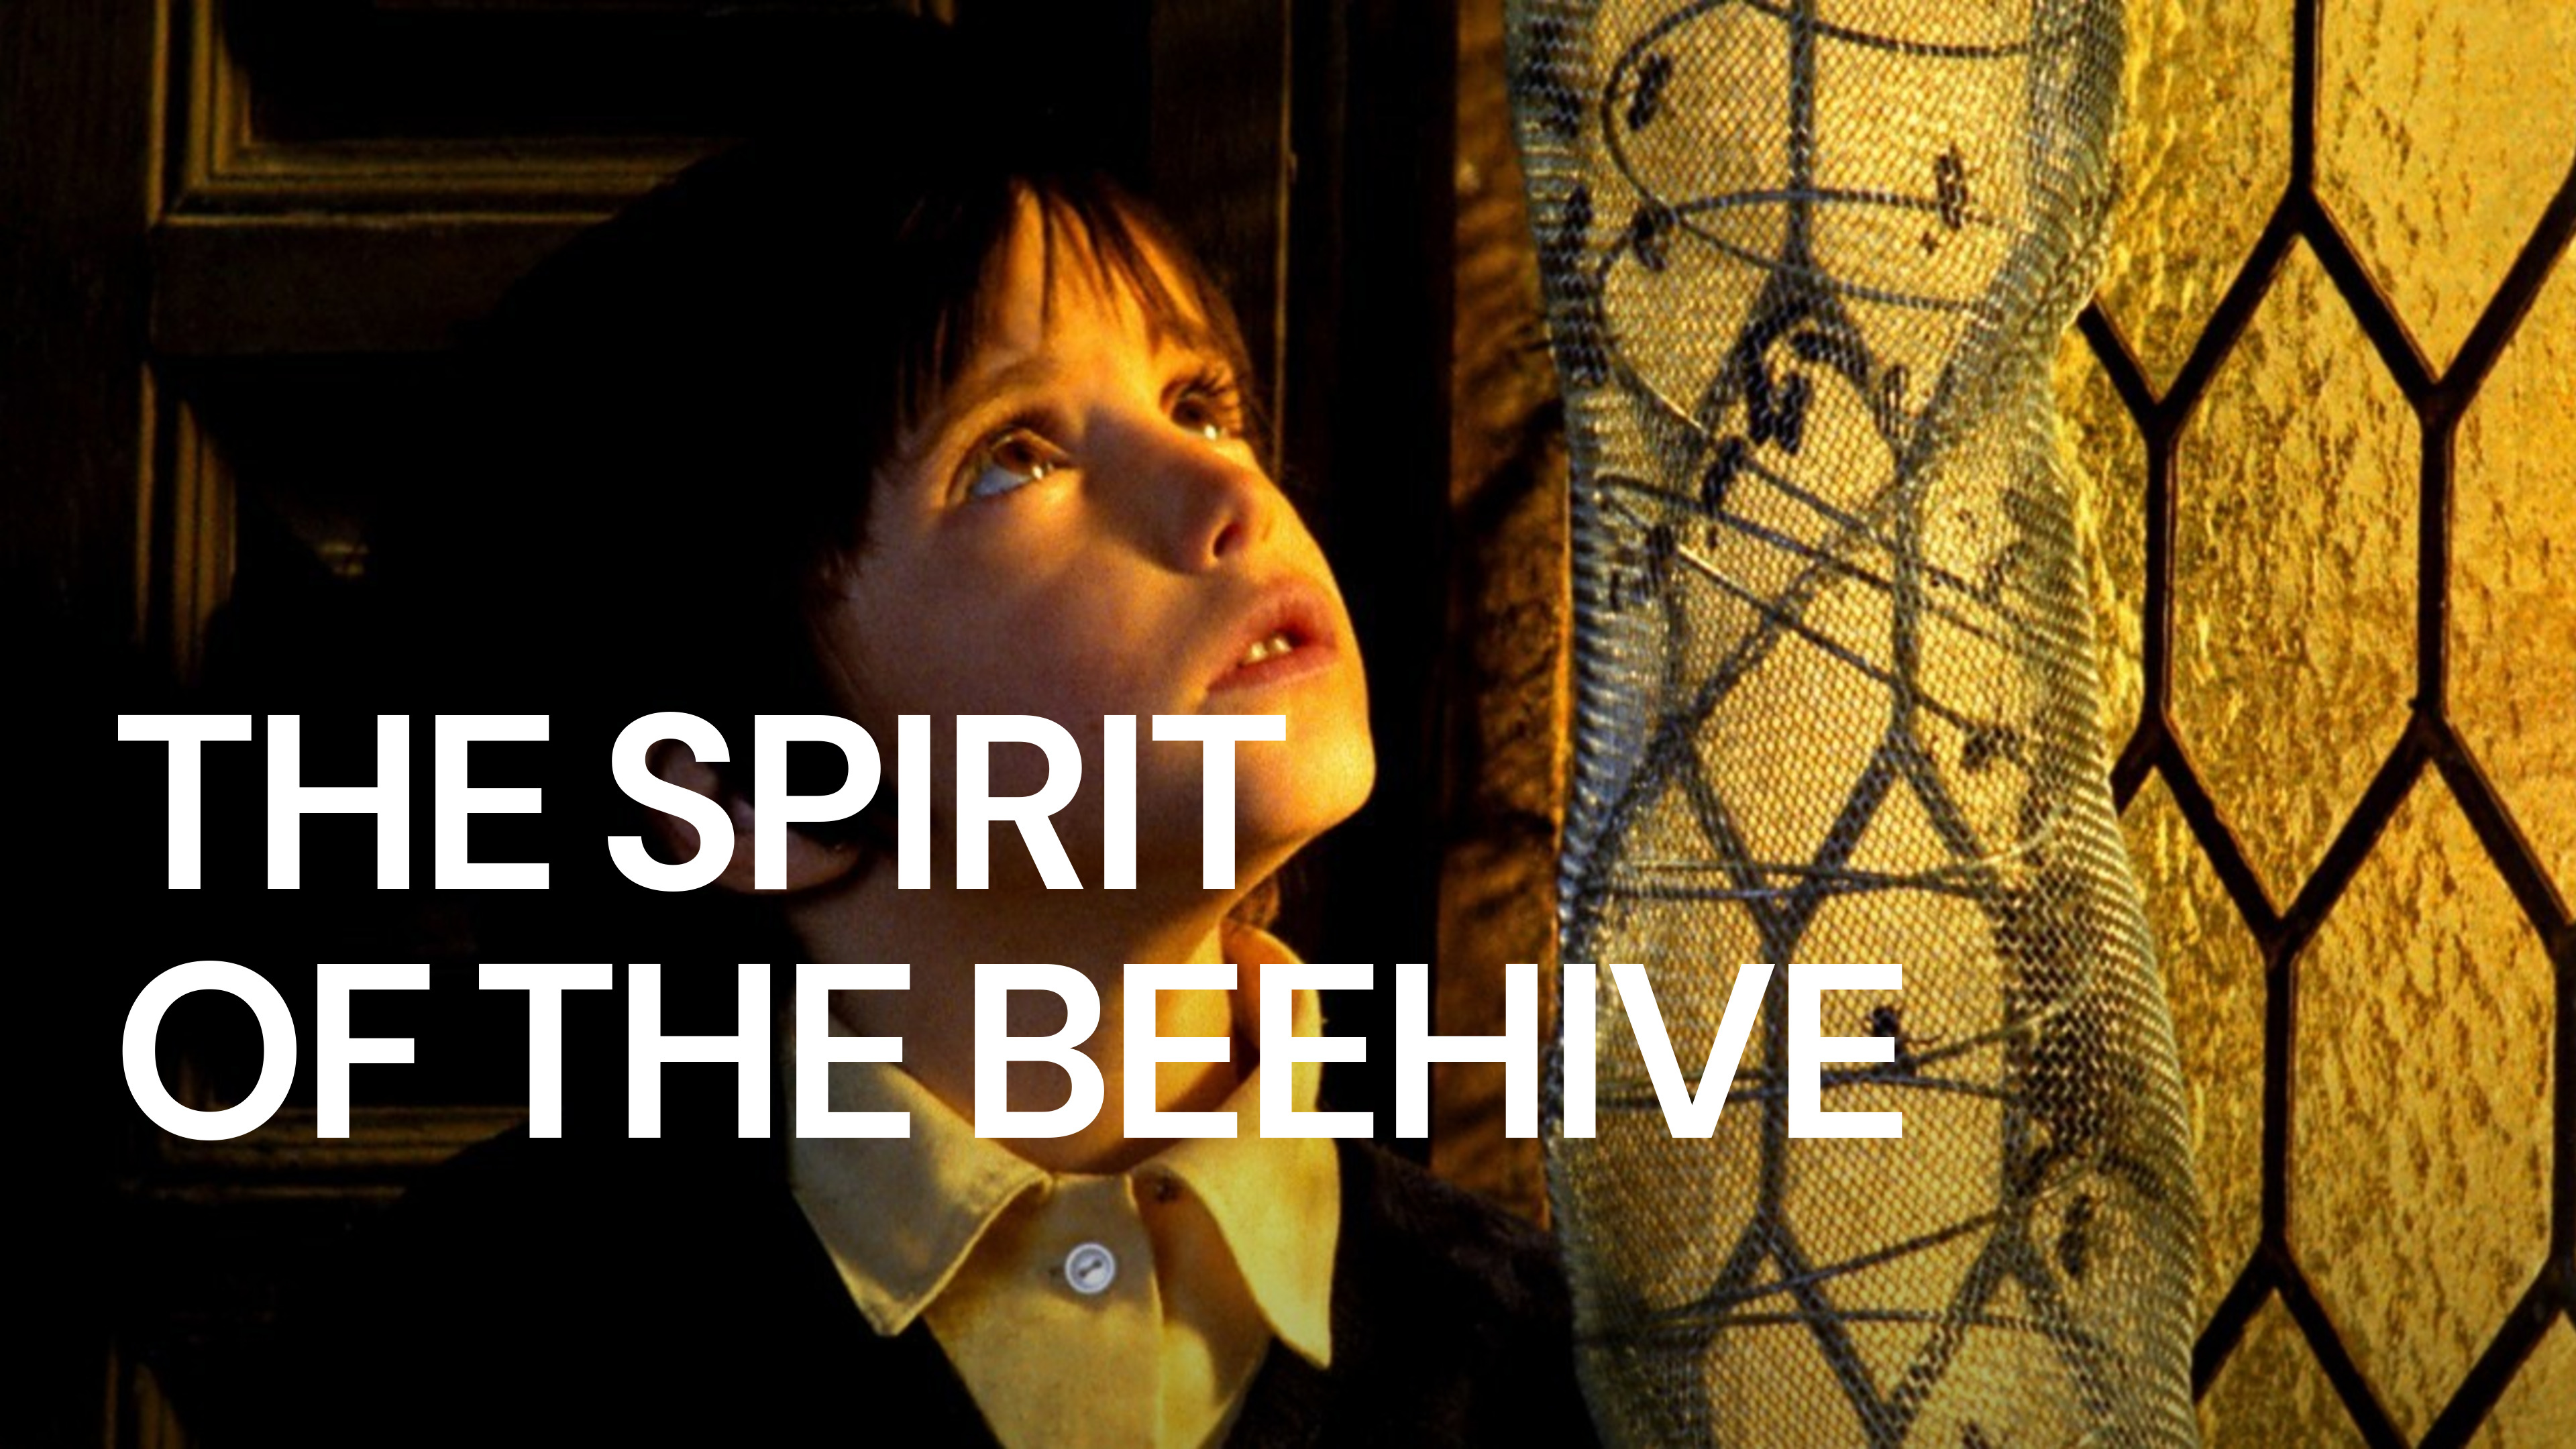 37-facts-about-the-movie-the-spirit-of-the-beehive